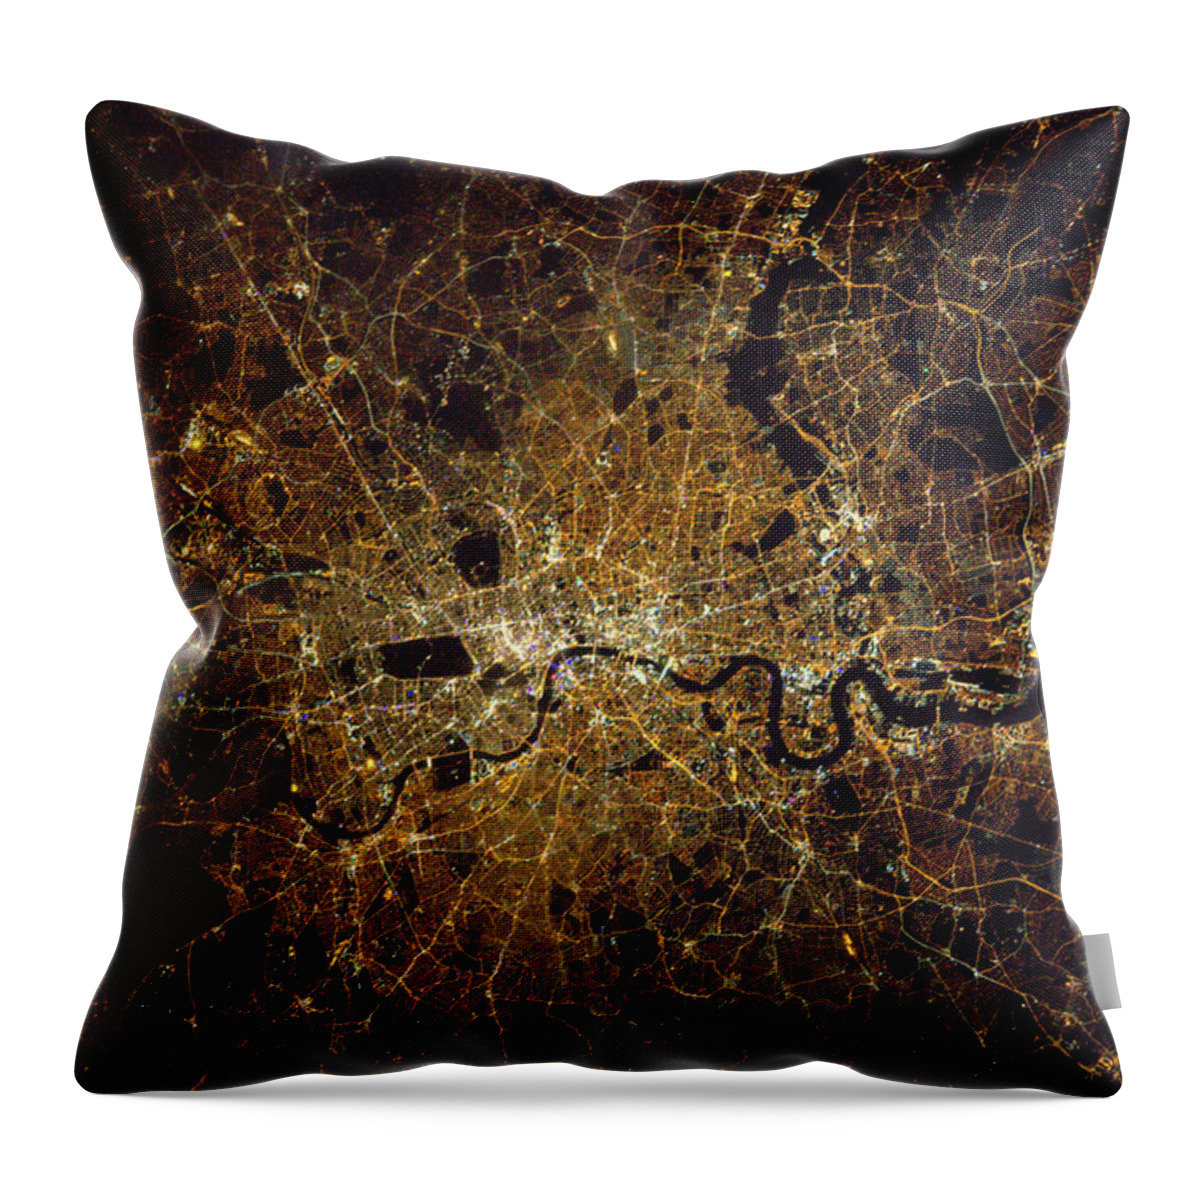 Satellite Image Throw Pillow featuring the photograph London At Night, Satellite Image by Science Source